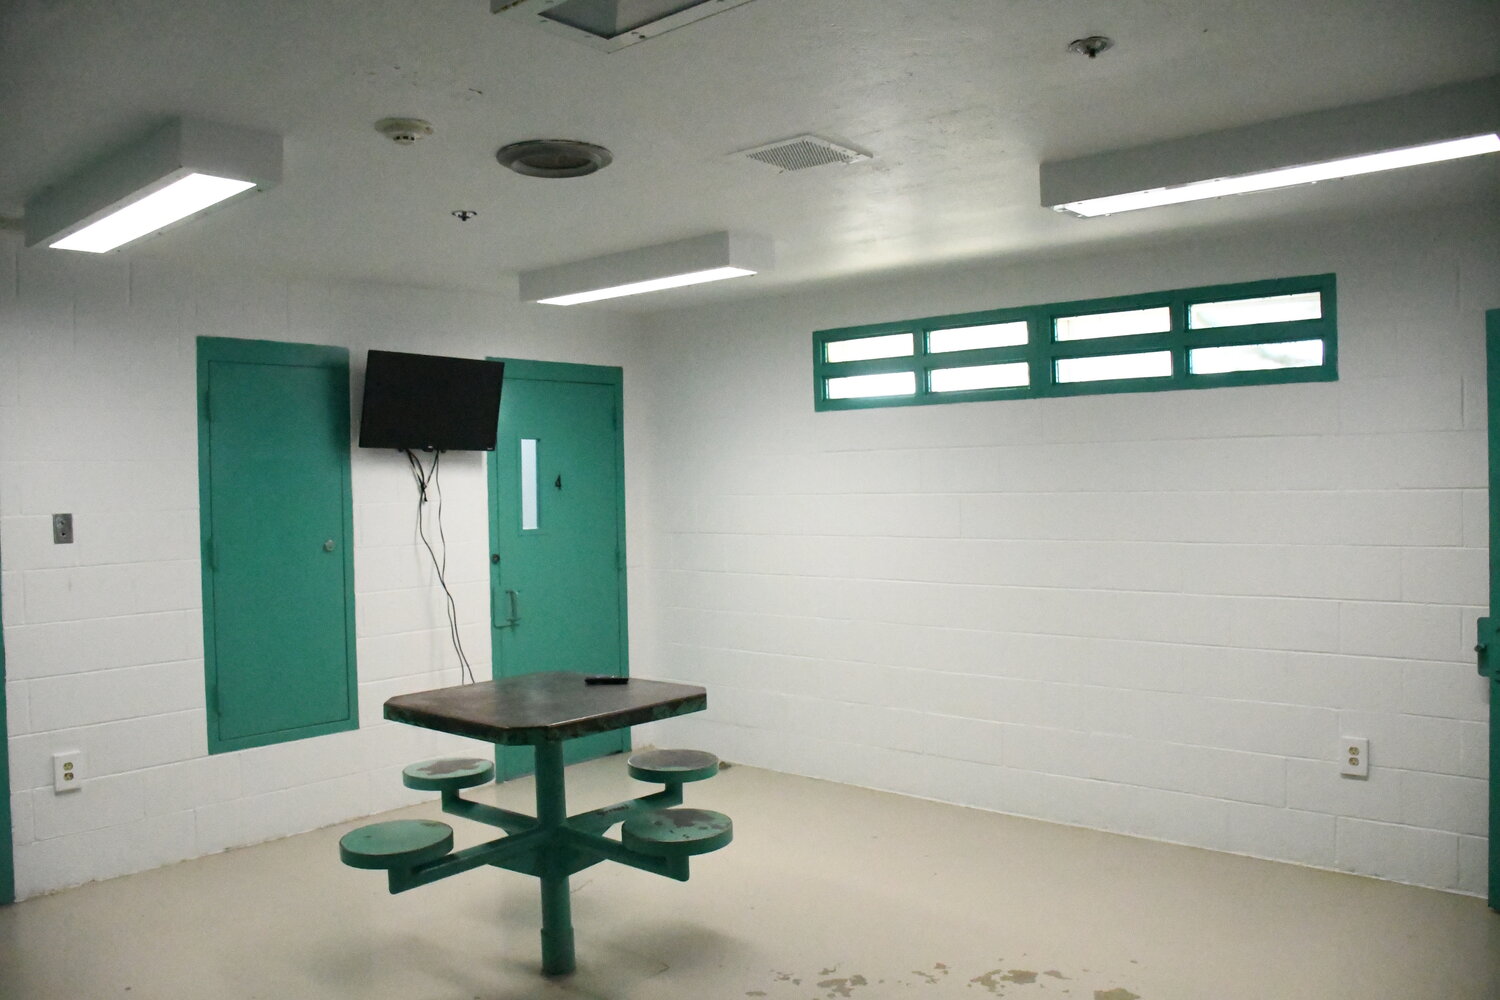 The common area of a four-cell pod at the Uinta County Detention Center is pictured above. Thanks to surveillance equipment provided by the Uinta County Attorney’s Office, the pod can be used to monitor mental health detainees.